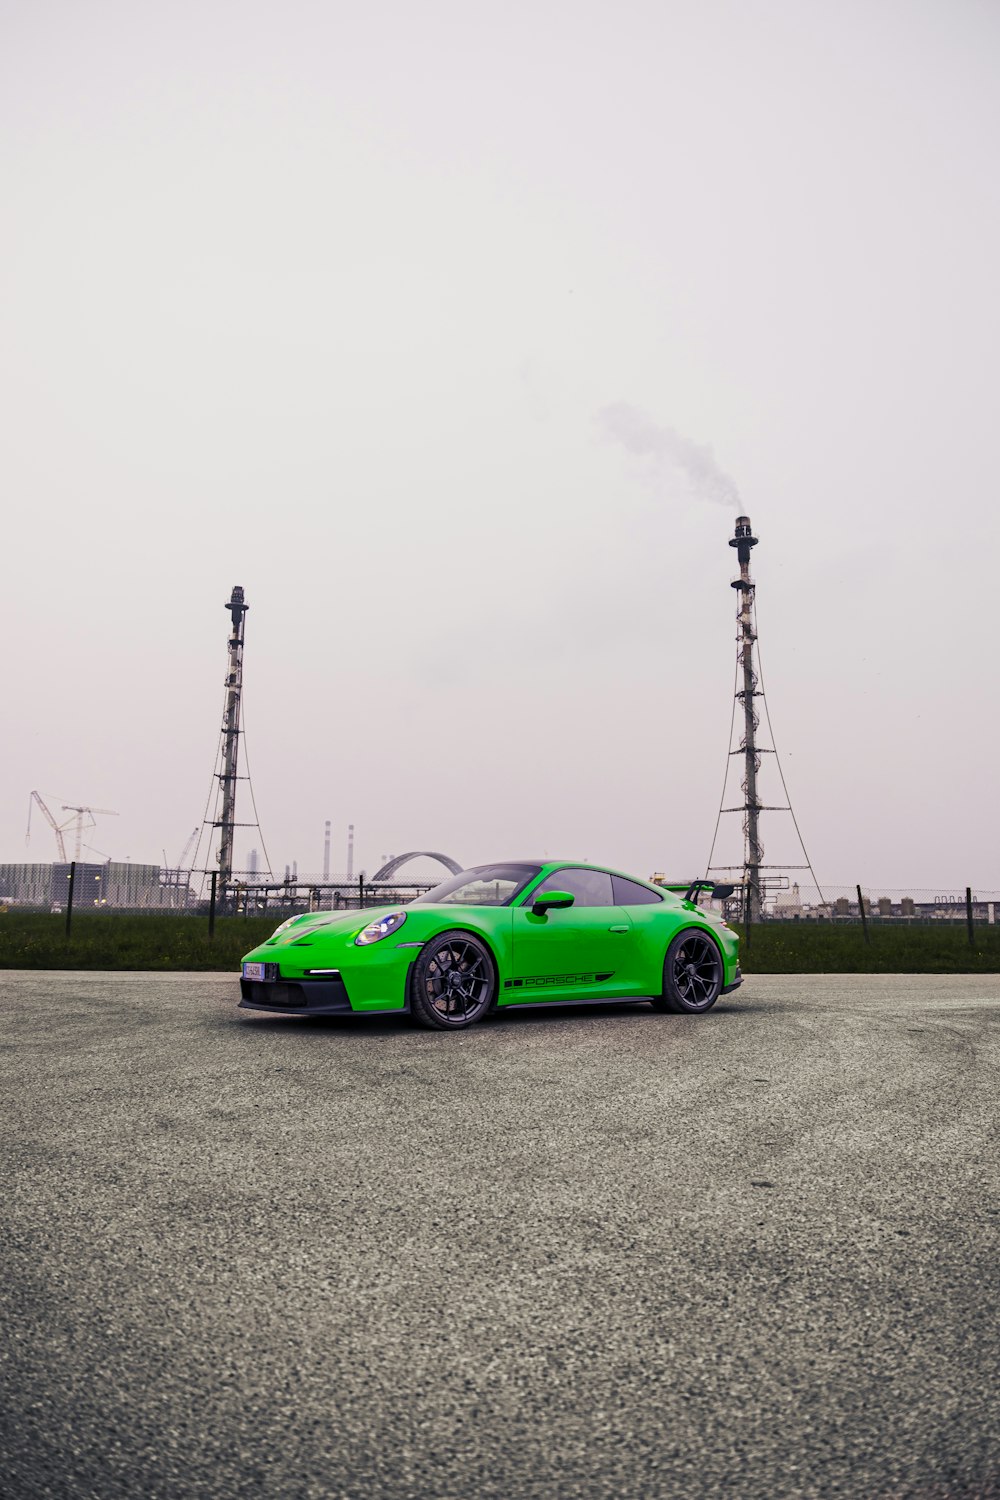 a green sports car parked in a parking lot